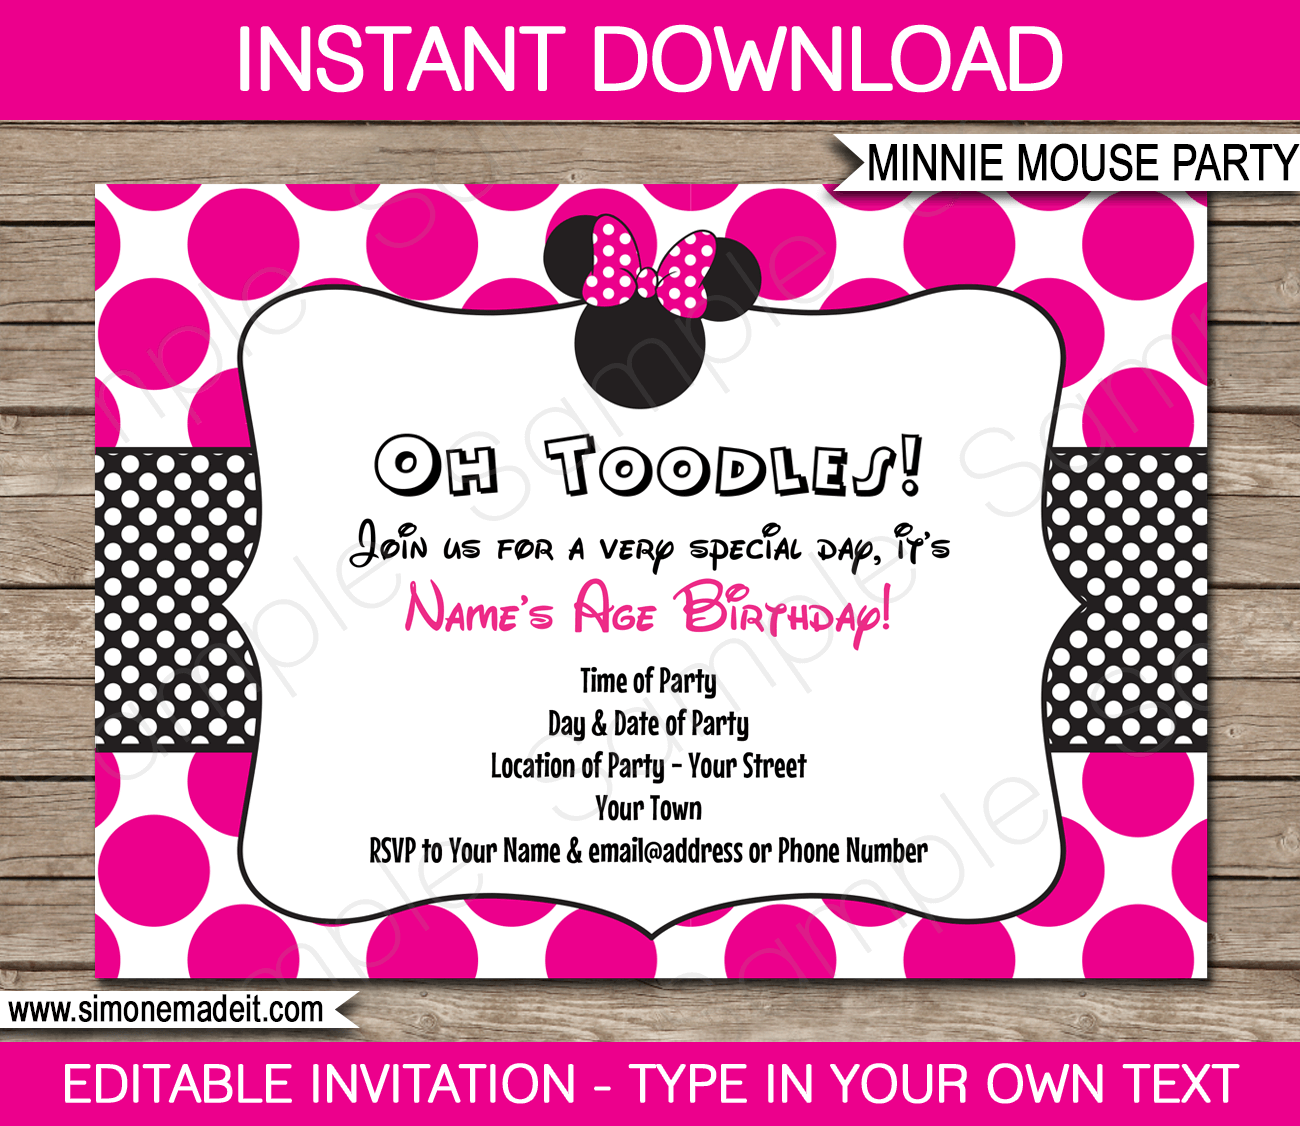 Minnie Mouse Party Invitations Template